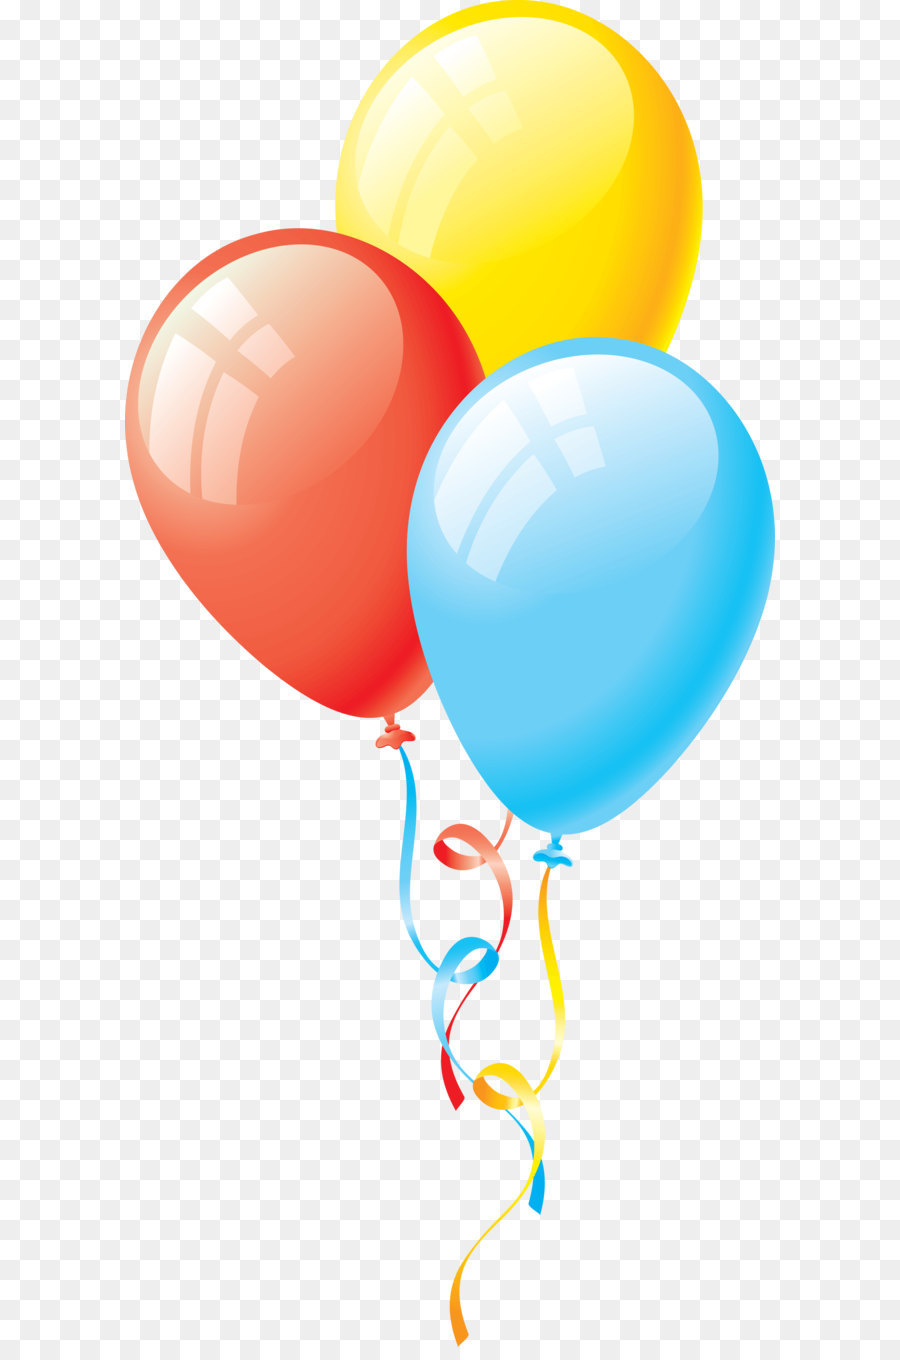 Balloon Clip art - Colorful Balloon Png Image Download Balloons png download - 1953*4048 - Free Transparent Balloon png Download.